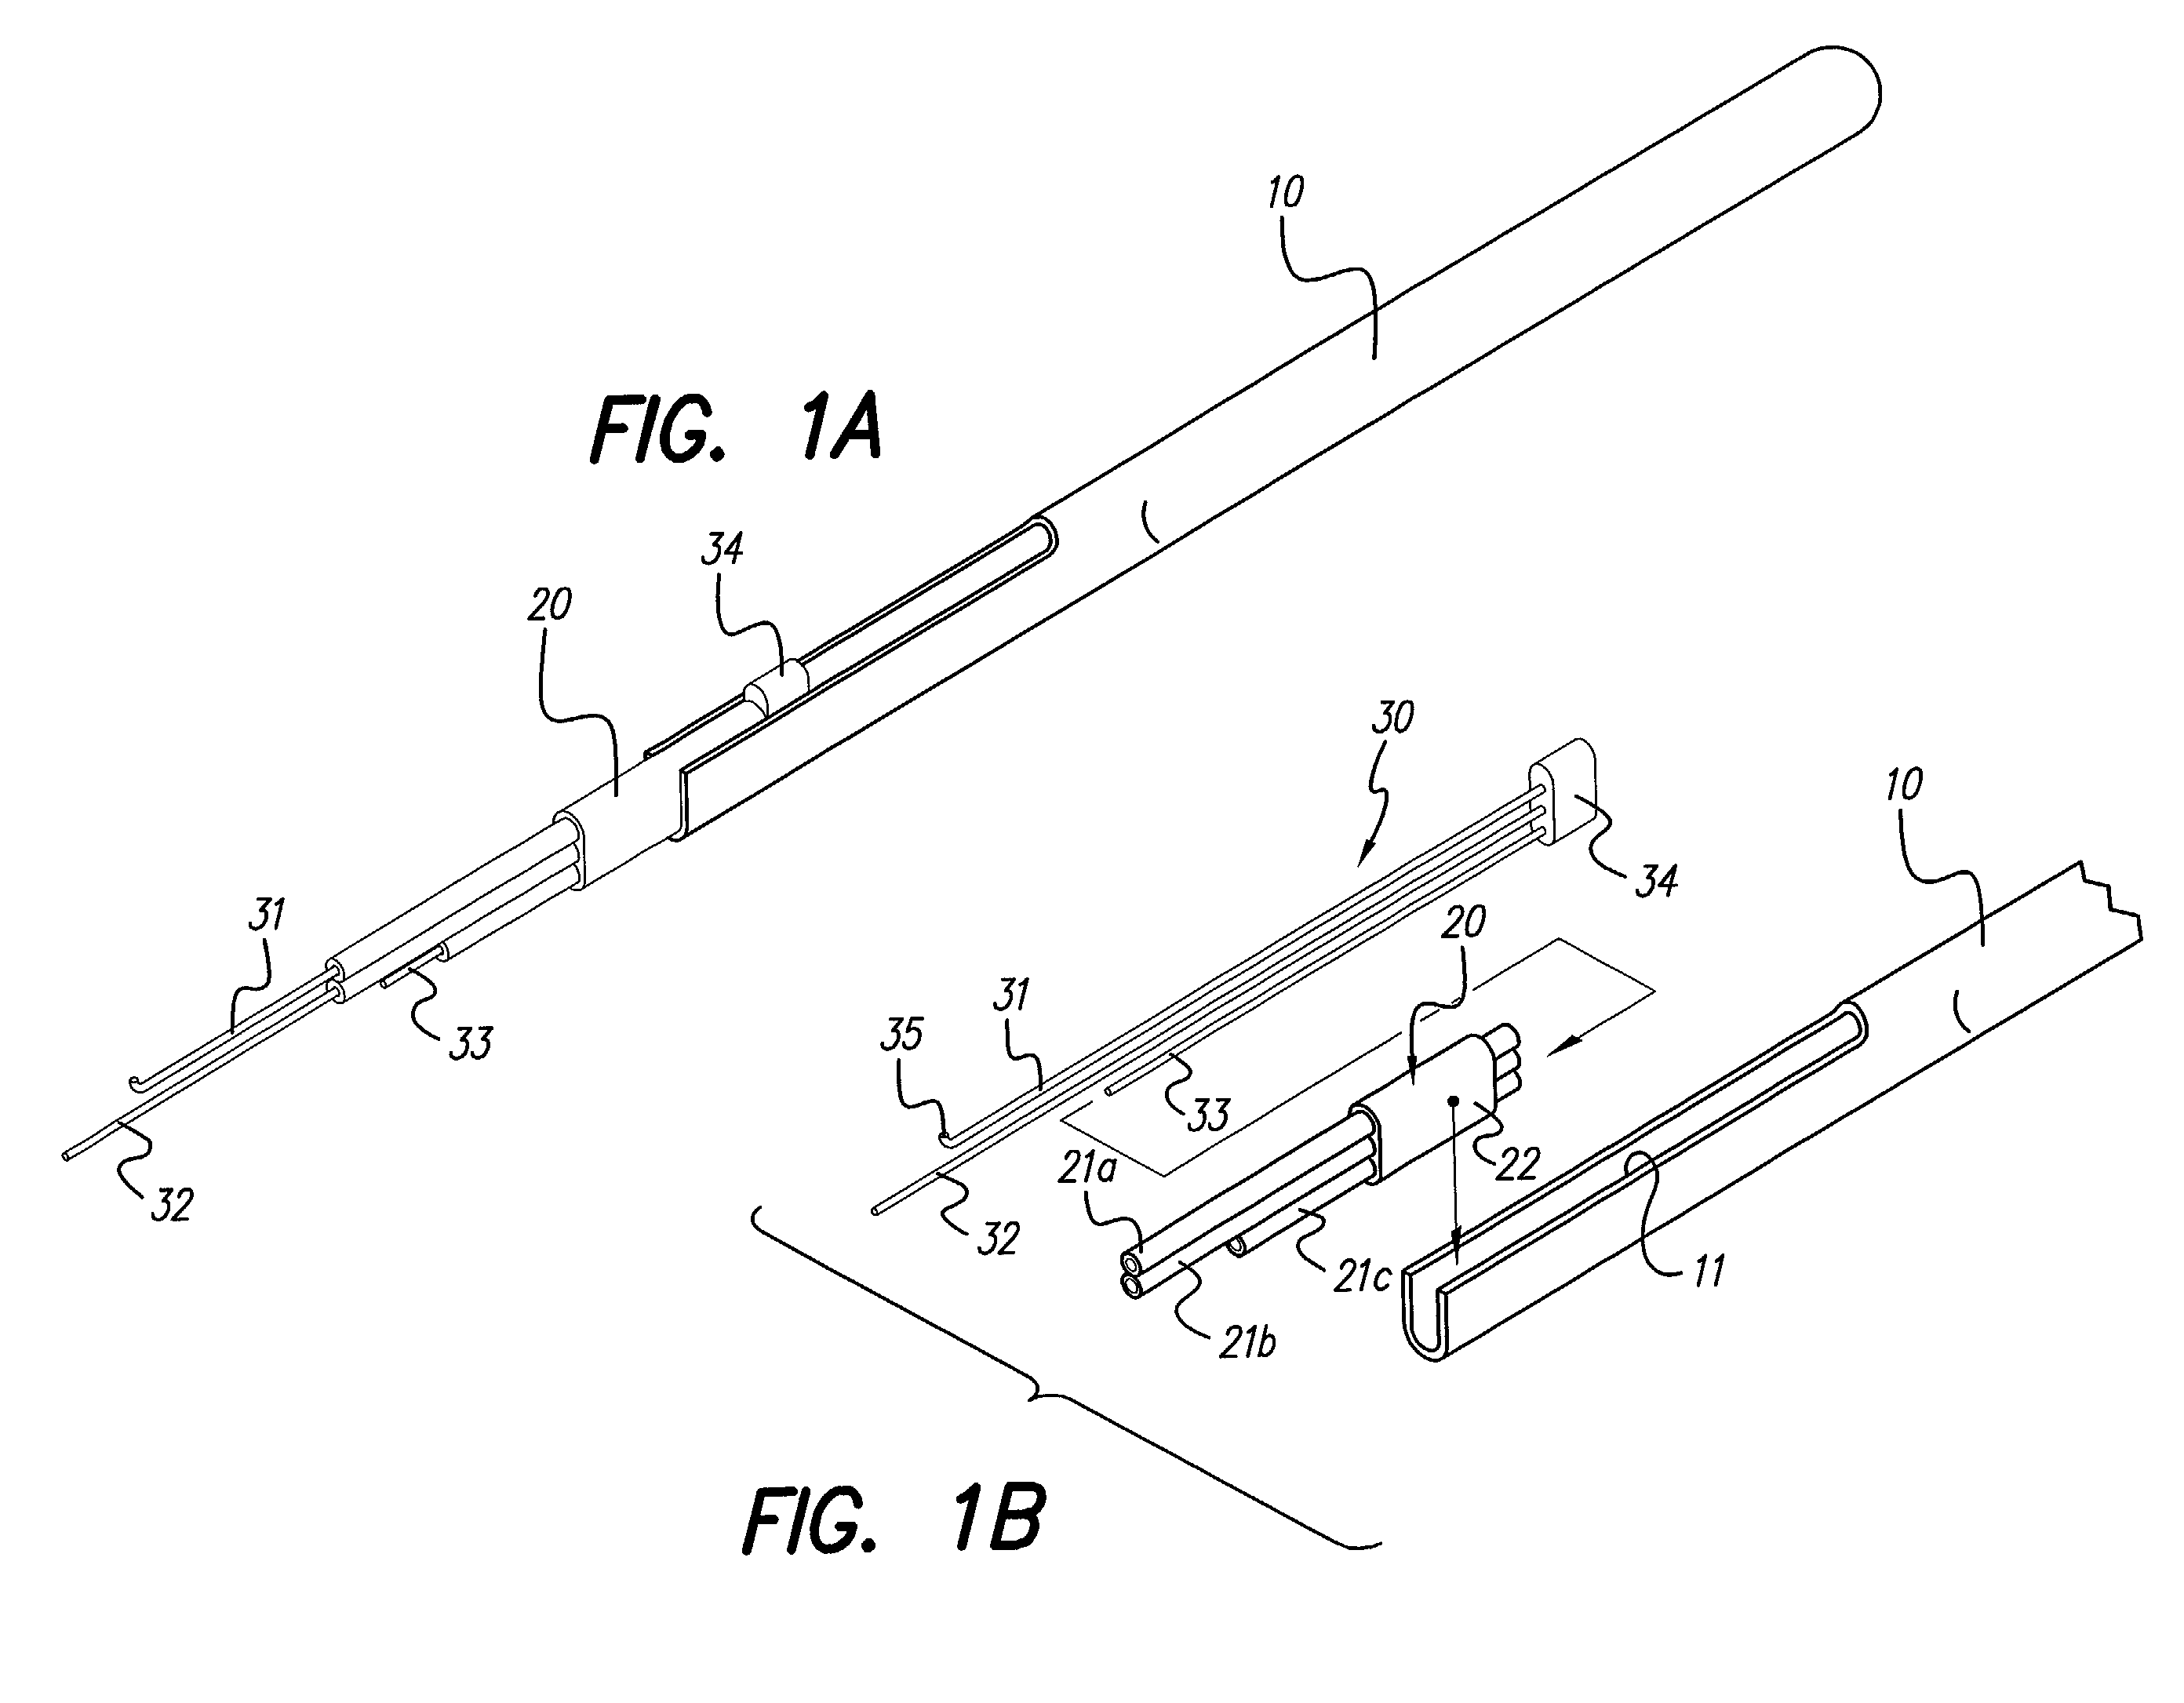 Insertion tool for placement of electrode system inside the cochlear lumen